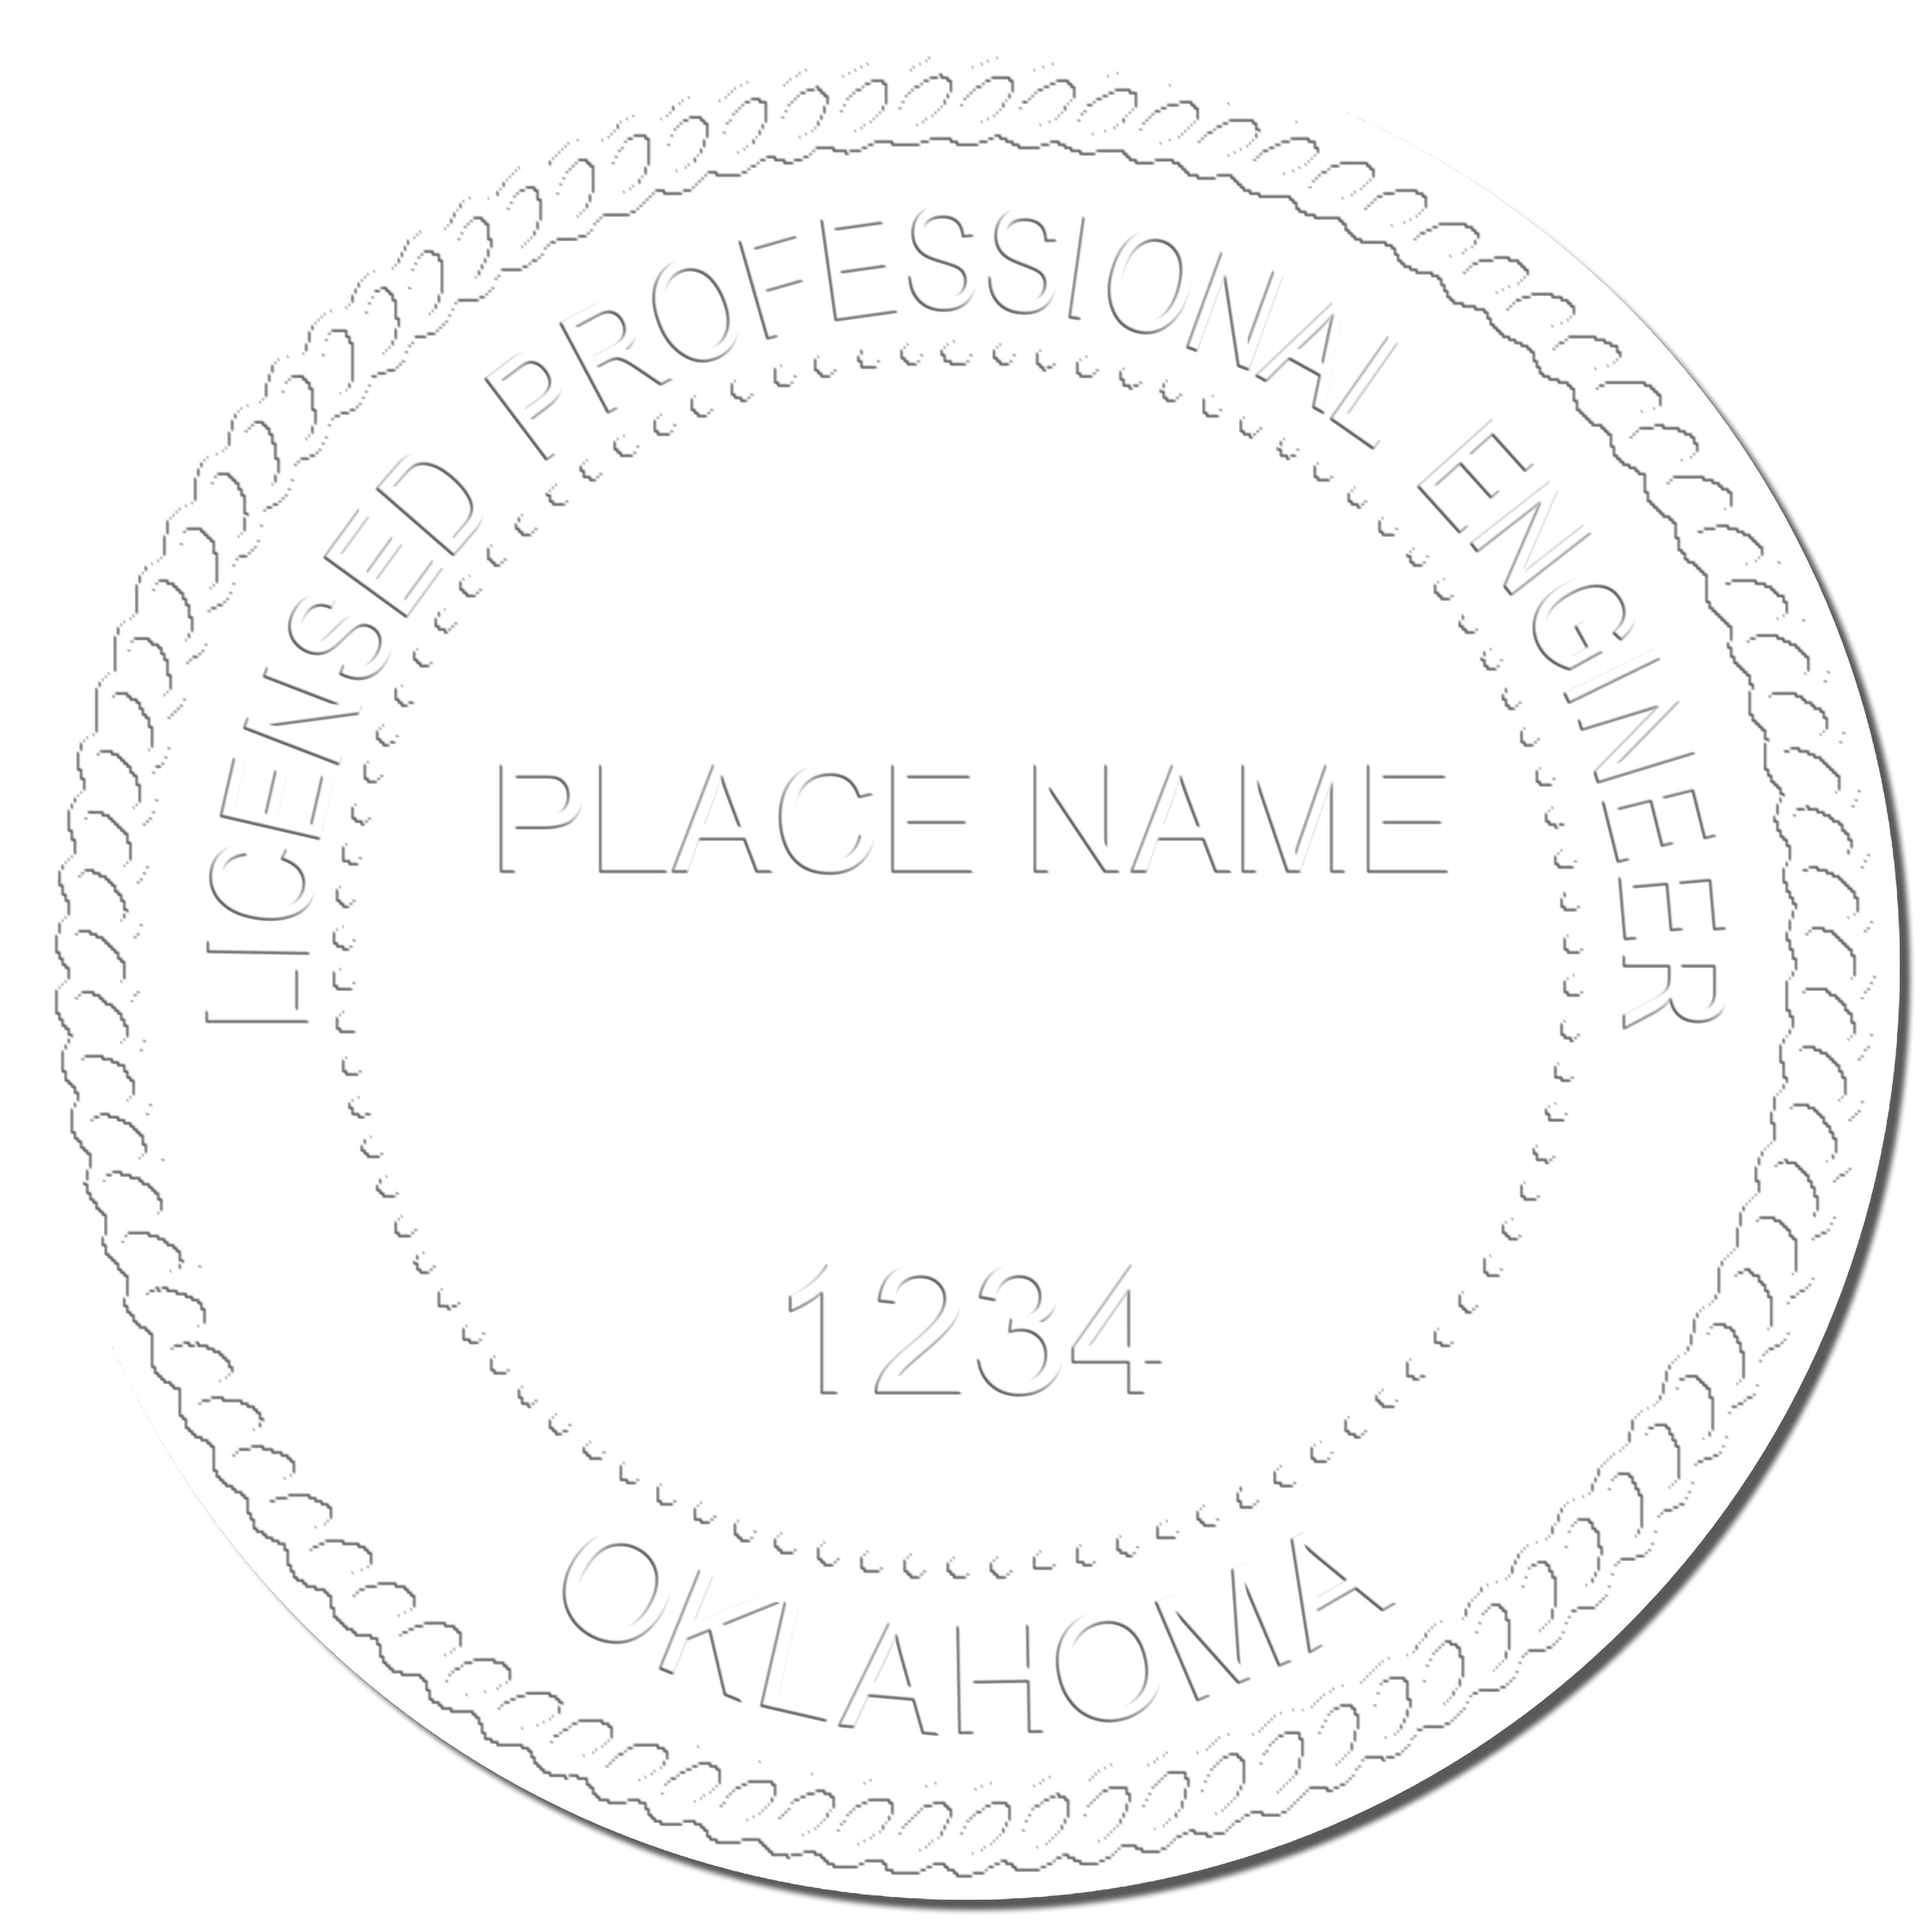 This paper is stamped with a sample imprint of the State of Oklahoma Extended Long Reach Engineer Seal, signifying its quality and reliability.